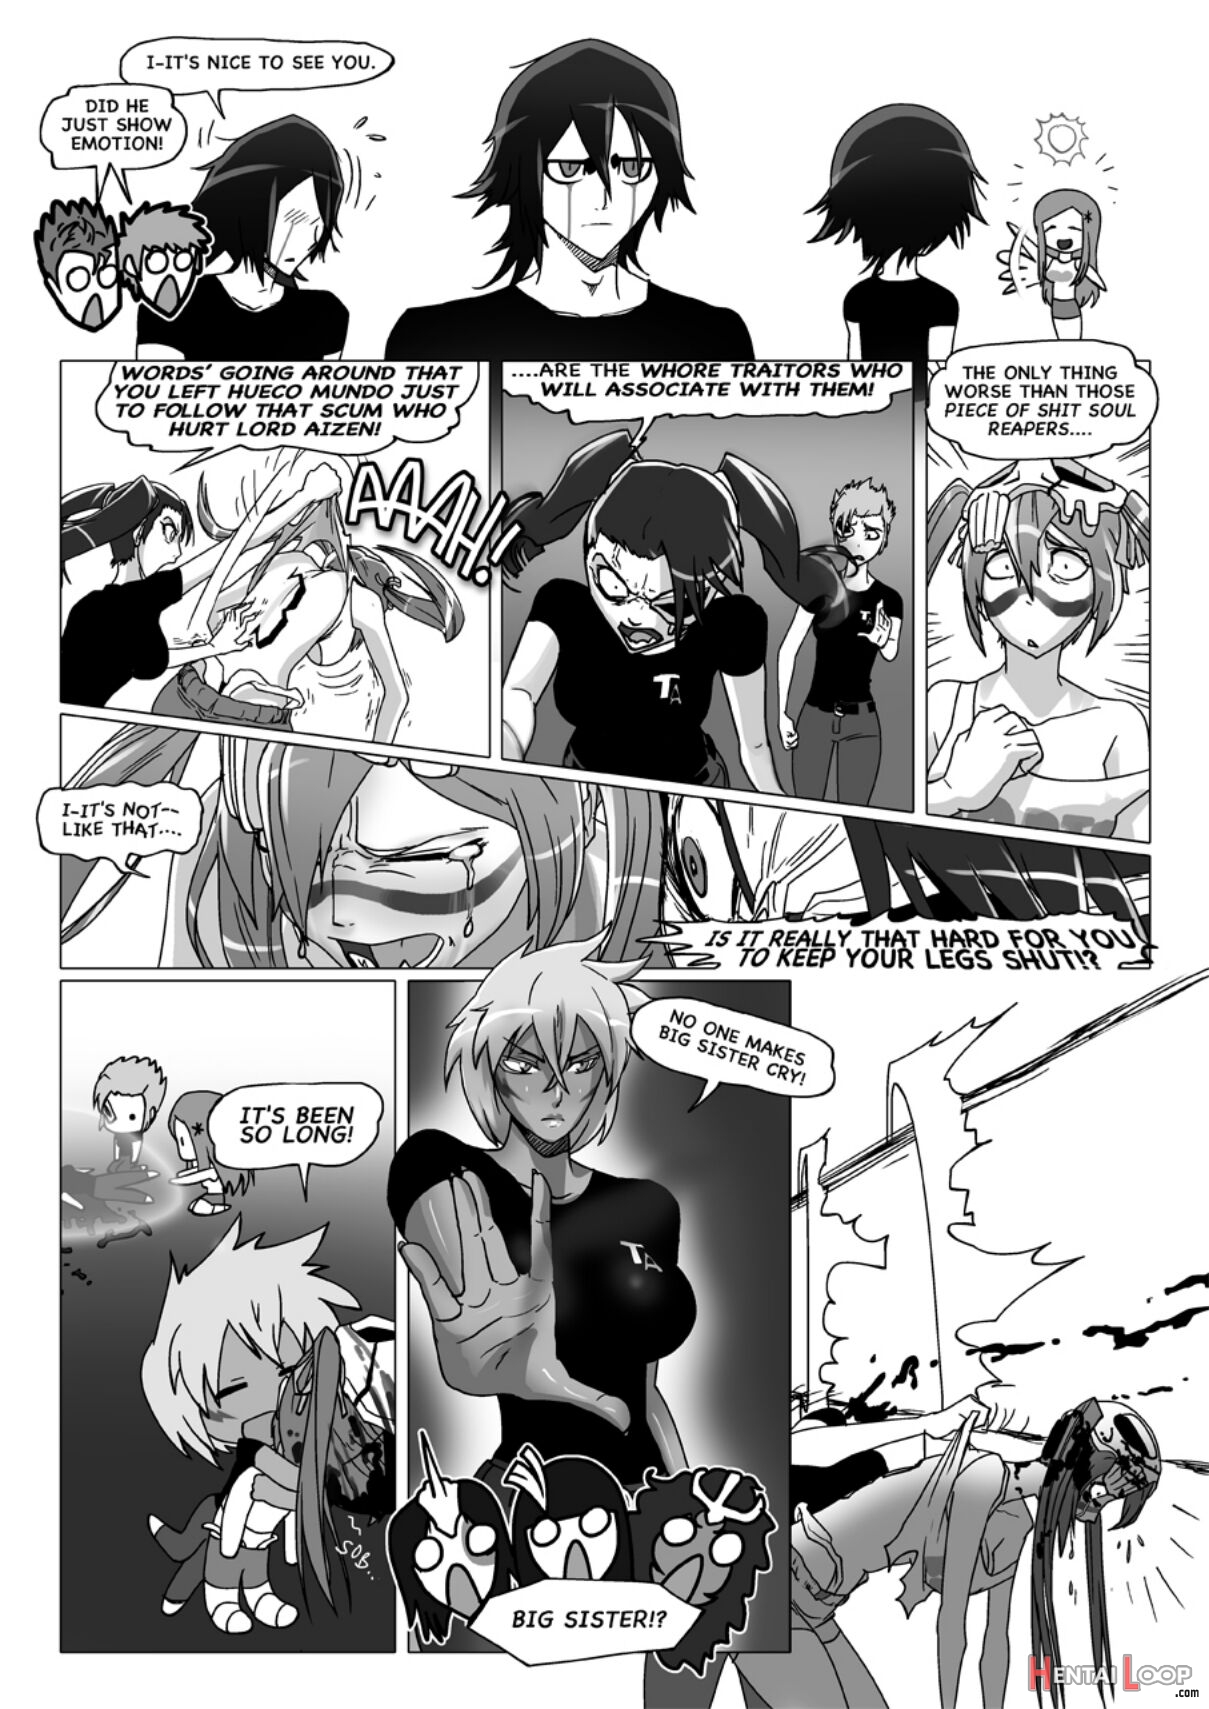 Happy To Serve You - Xxx Version page 104